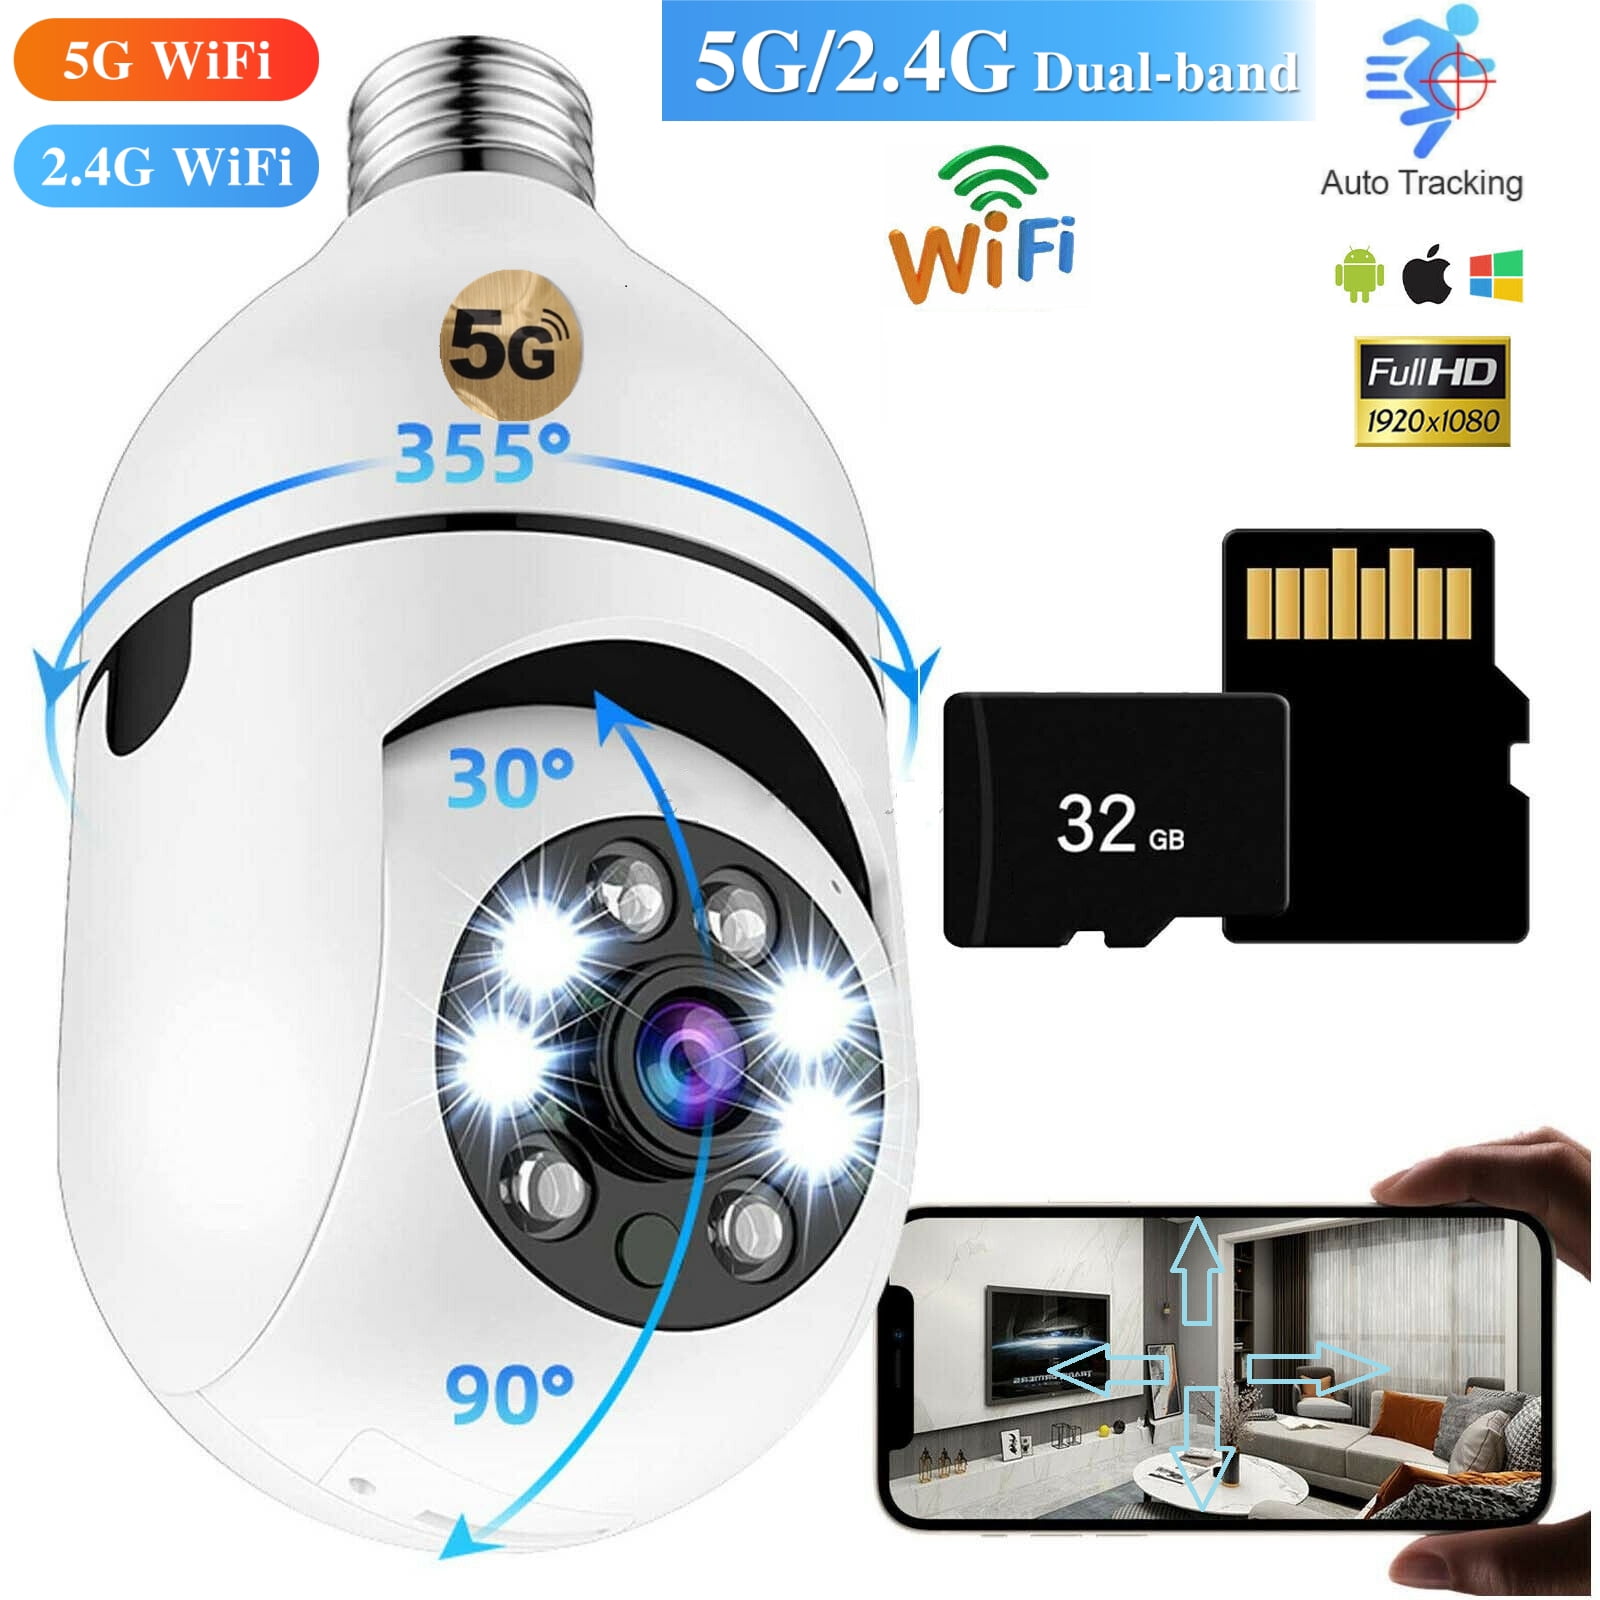 Dazone 5GHz WIFI Light Bulb Camera With 32GB TF Card, 1080P Wireless 360 Degree Panoramic E27/E26 Home Security Surveillance IP Camera CCTV Cam, Night Vision,Two-Way Audio,Motion Detection, 5G&amp;2.4G